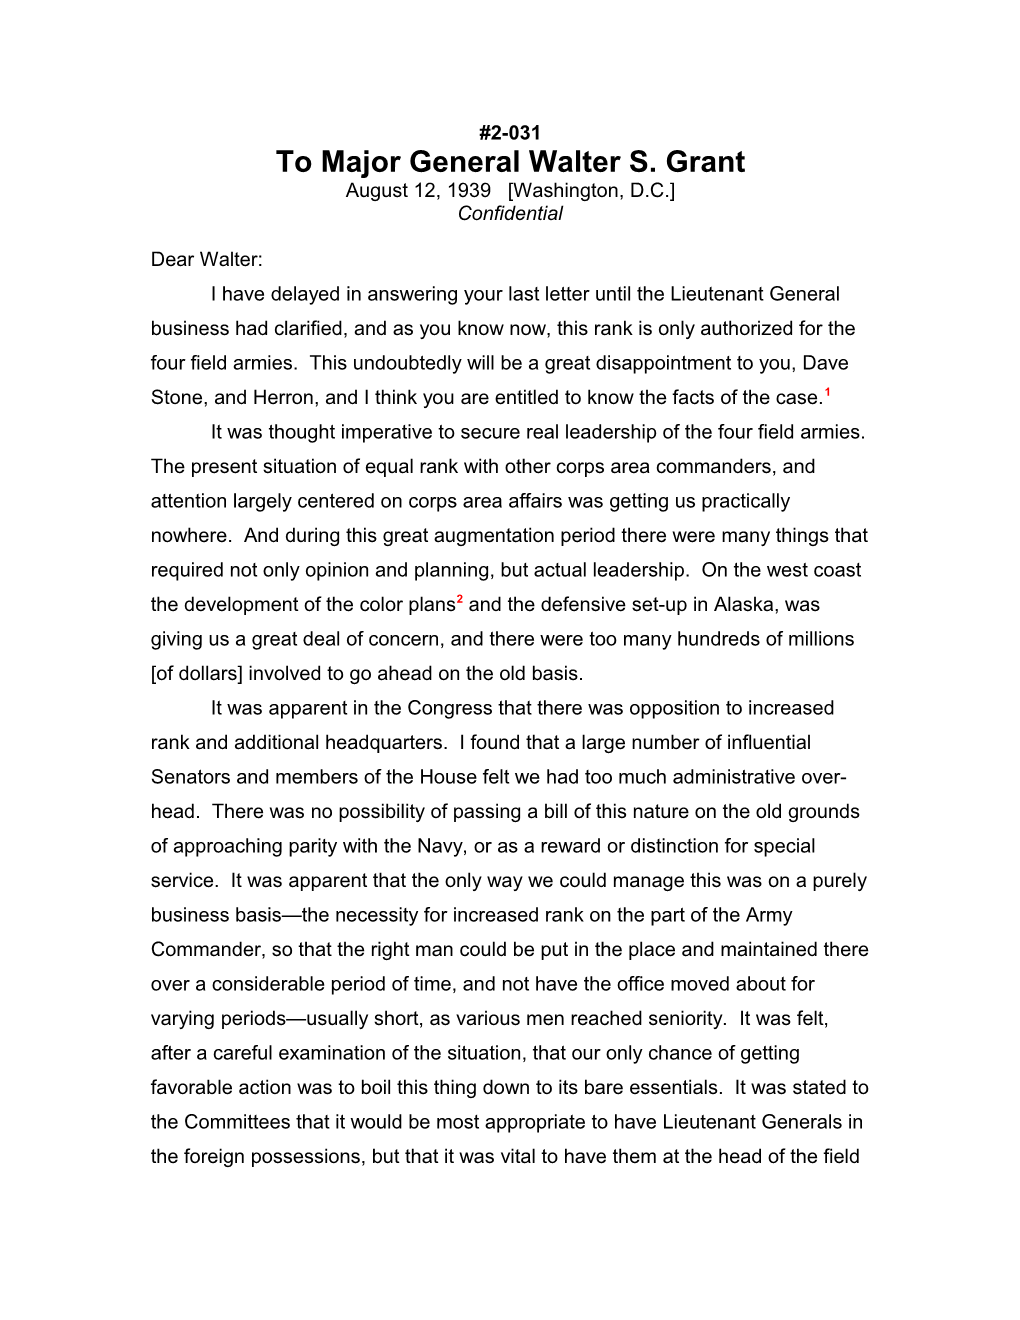 To Major General Walter S. Grant